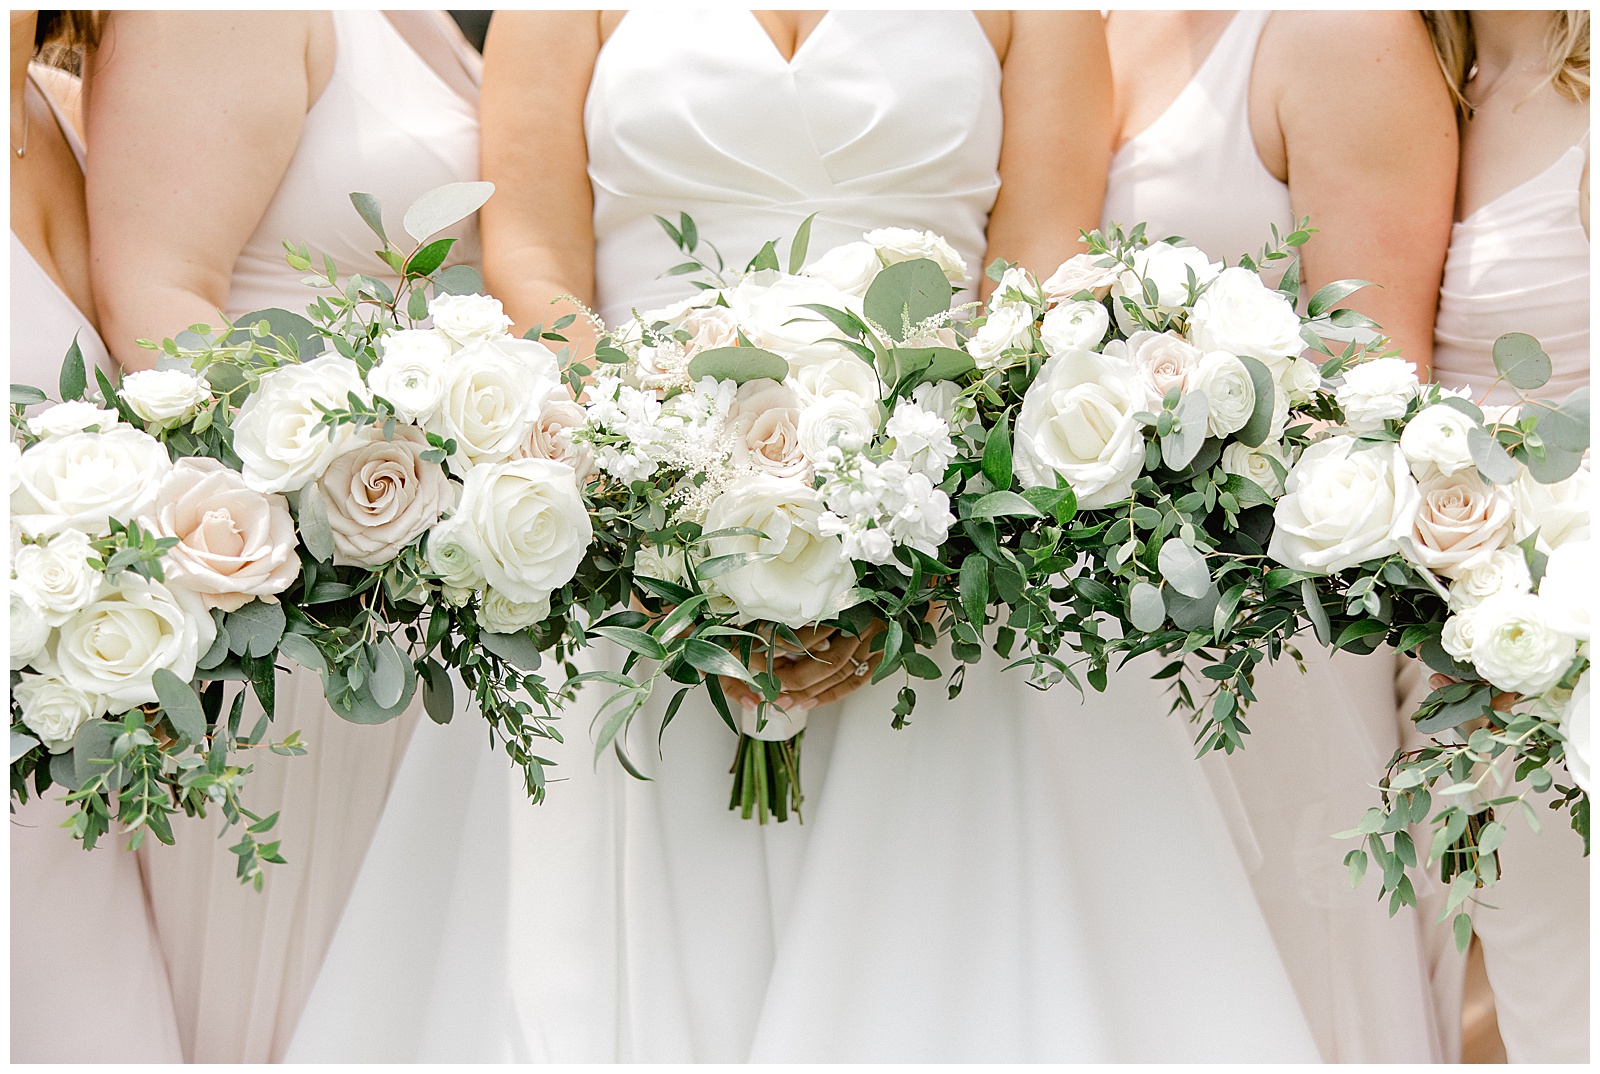 bride in the middle with two ladies on each side of her. faces are not visible. Image is focused on the wedding bouquet consisting of white and blush roses with eucalyptus. 